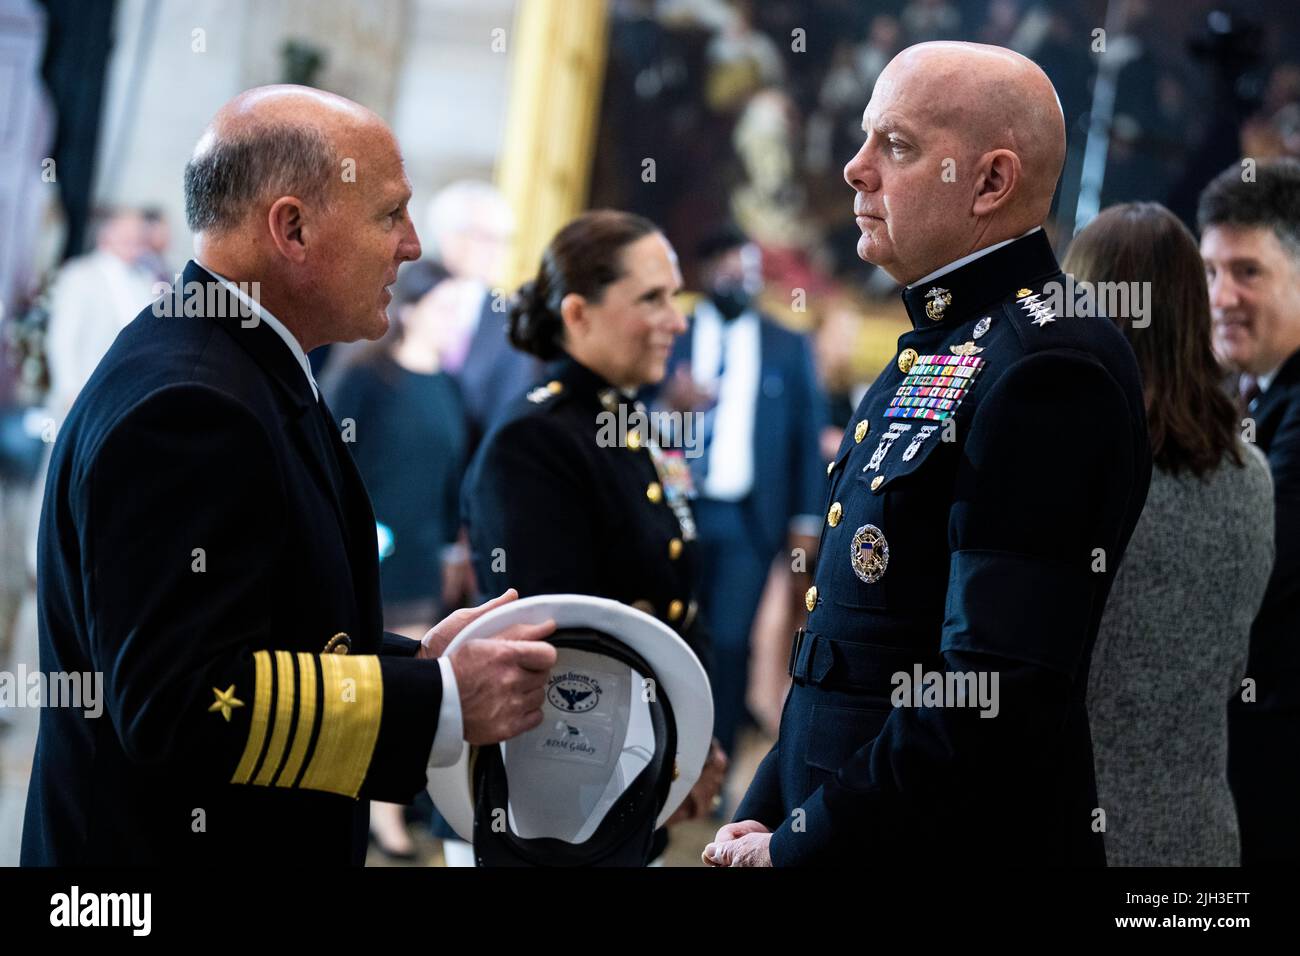 Washington DC, USA. 14th July, 2022. UNITED STATES - JULY 14: Commandant of the Marine Corps Gen. David H. Berger, right, and Chief of Naval Operations Adm. Mike Gilday, are seen before the remains of Hershel Woodrow “Woody” Williams, the last Medal of Honor recipient of World War II to pass away, were to lie in honor in the U.S. Capitol Rotunda in Washington, DC, on Thursday, July 14, 2022. Williams, who passed away at age 98, received the award for action in the Battle of Iwo Jima. (Tom Williams/Pool/Sipa USA) Credit: Sipa USA/Alamy Live News Stock Photo